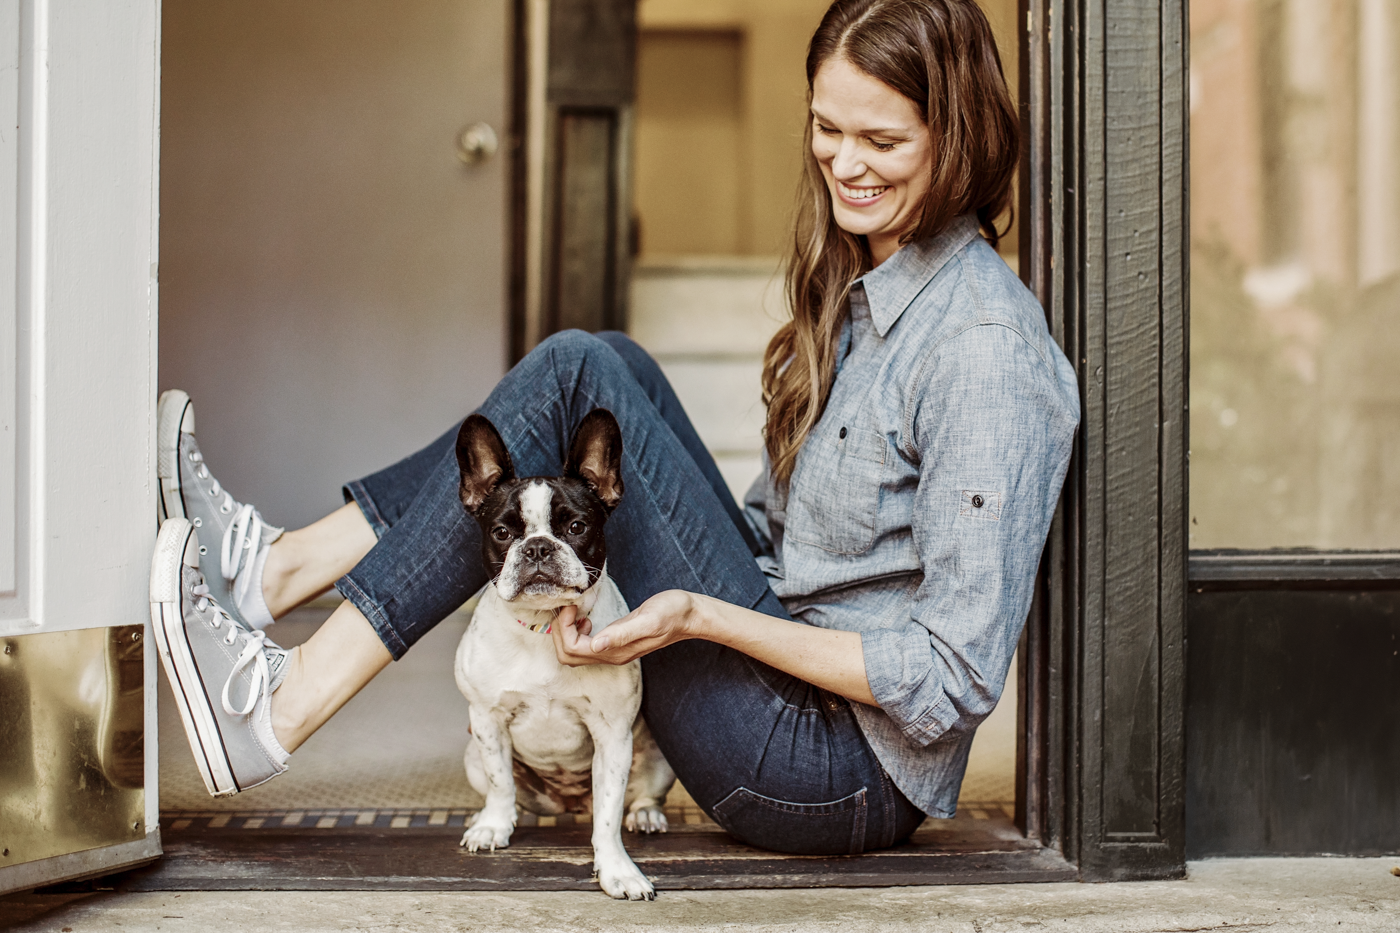 KL_Animals_sitting woman with boston terrier